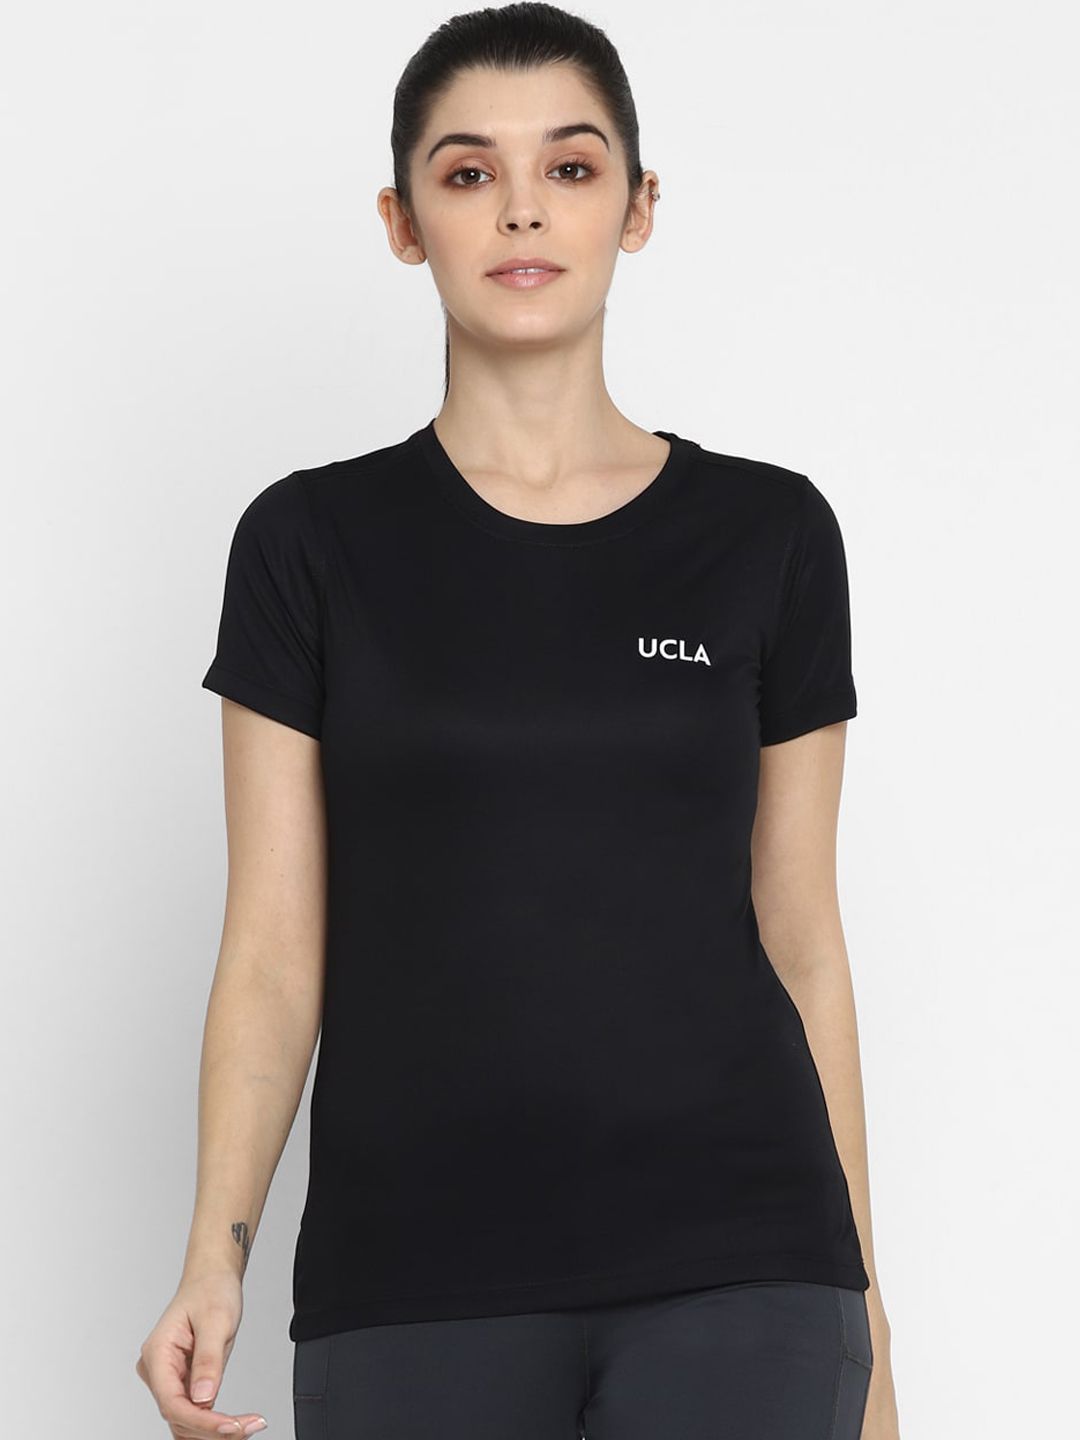 UCLA Women Black Solid Round Neck T-shirt Price in India